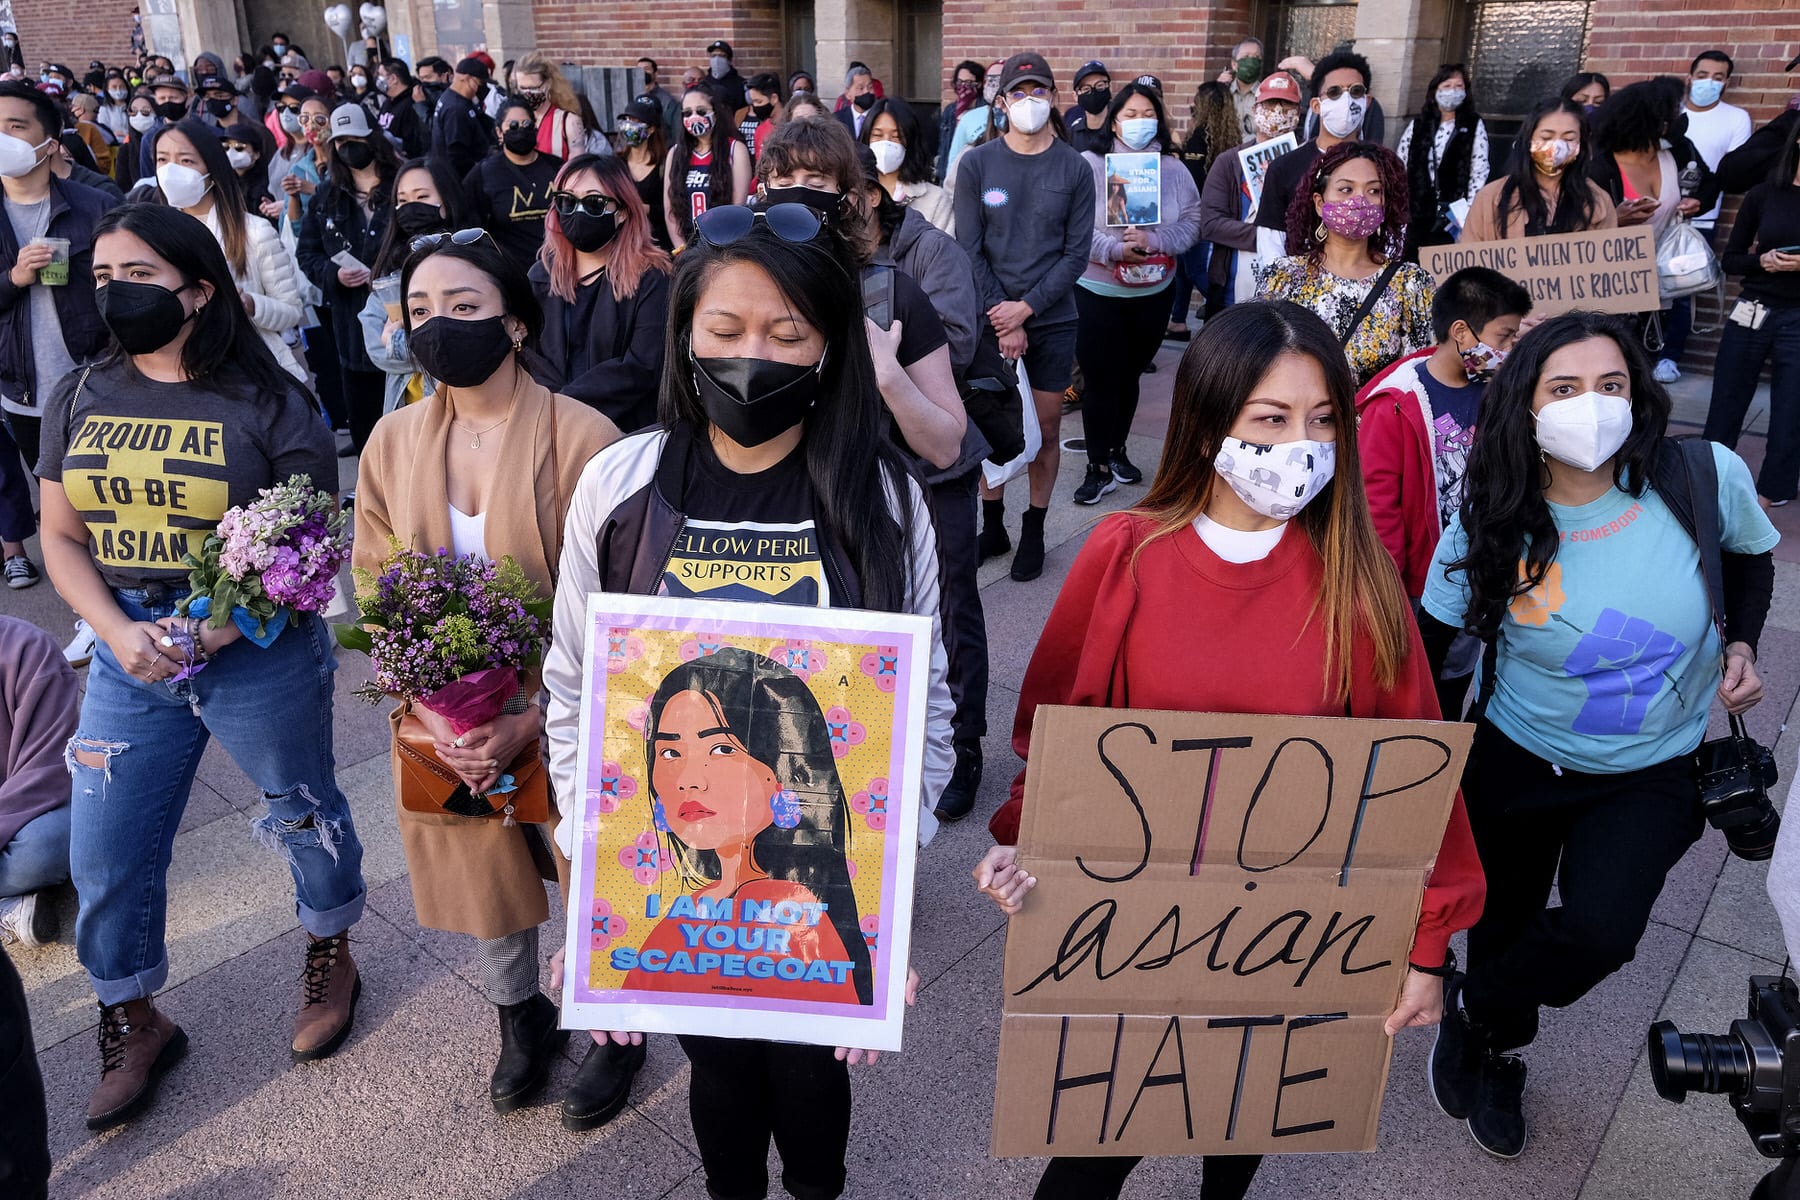 Demonstrators wearing face masks and holding signs take part in a rally